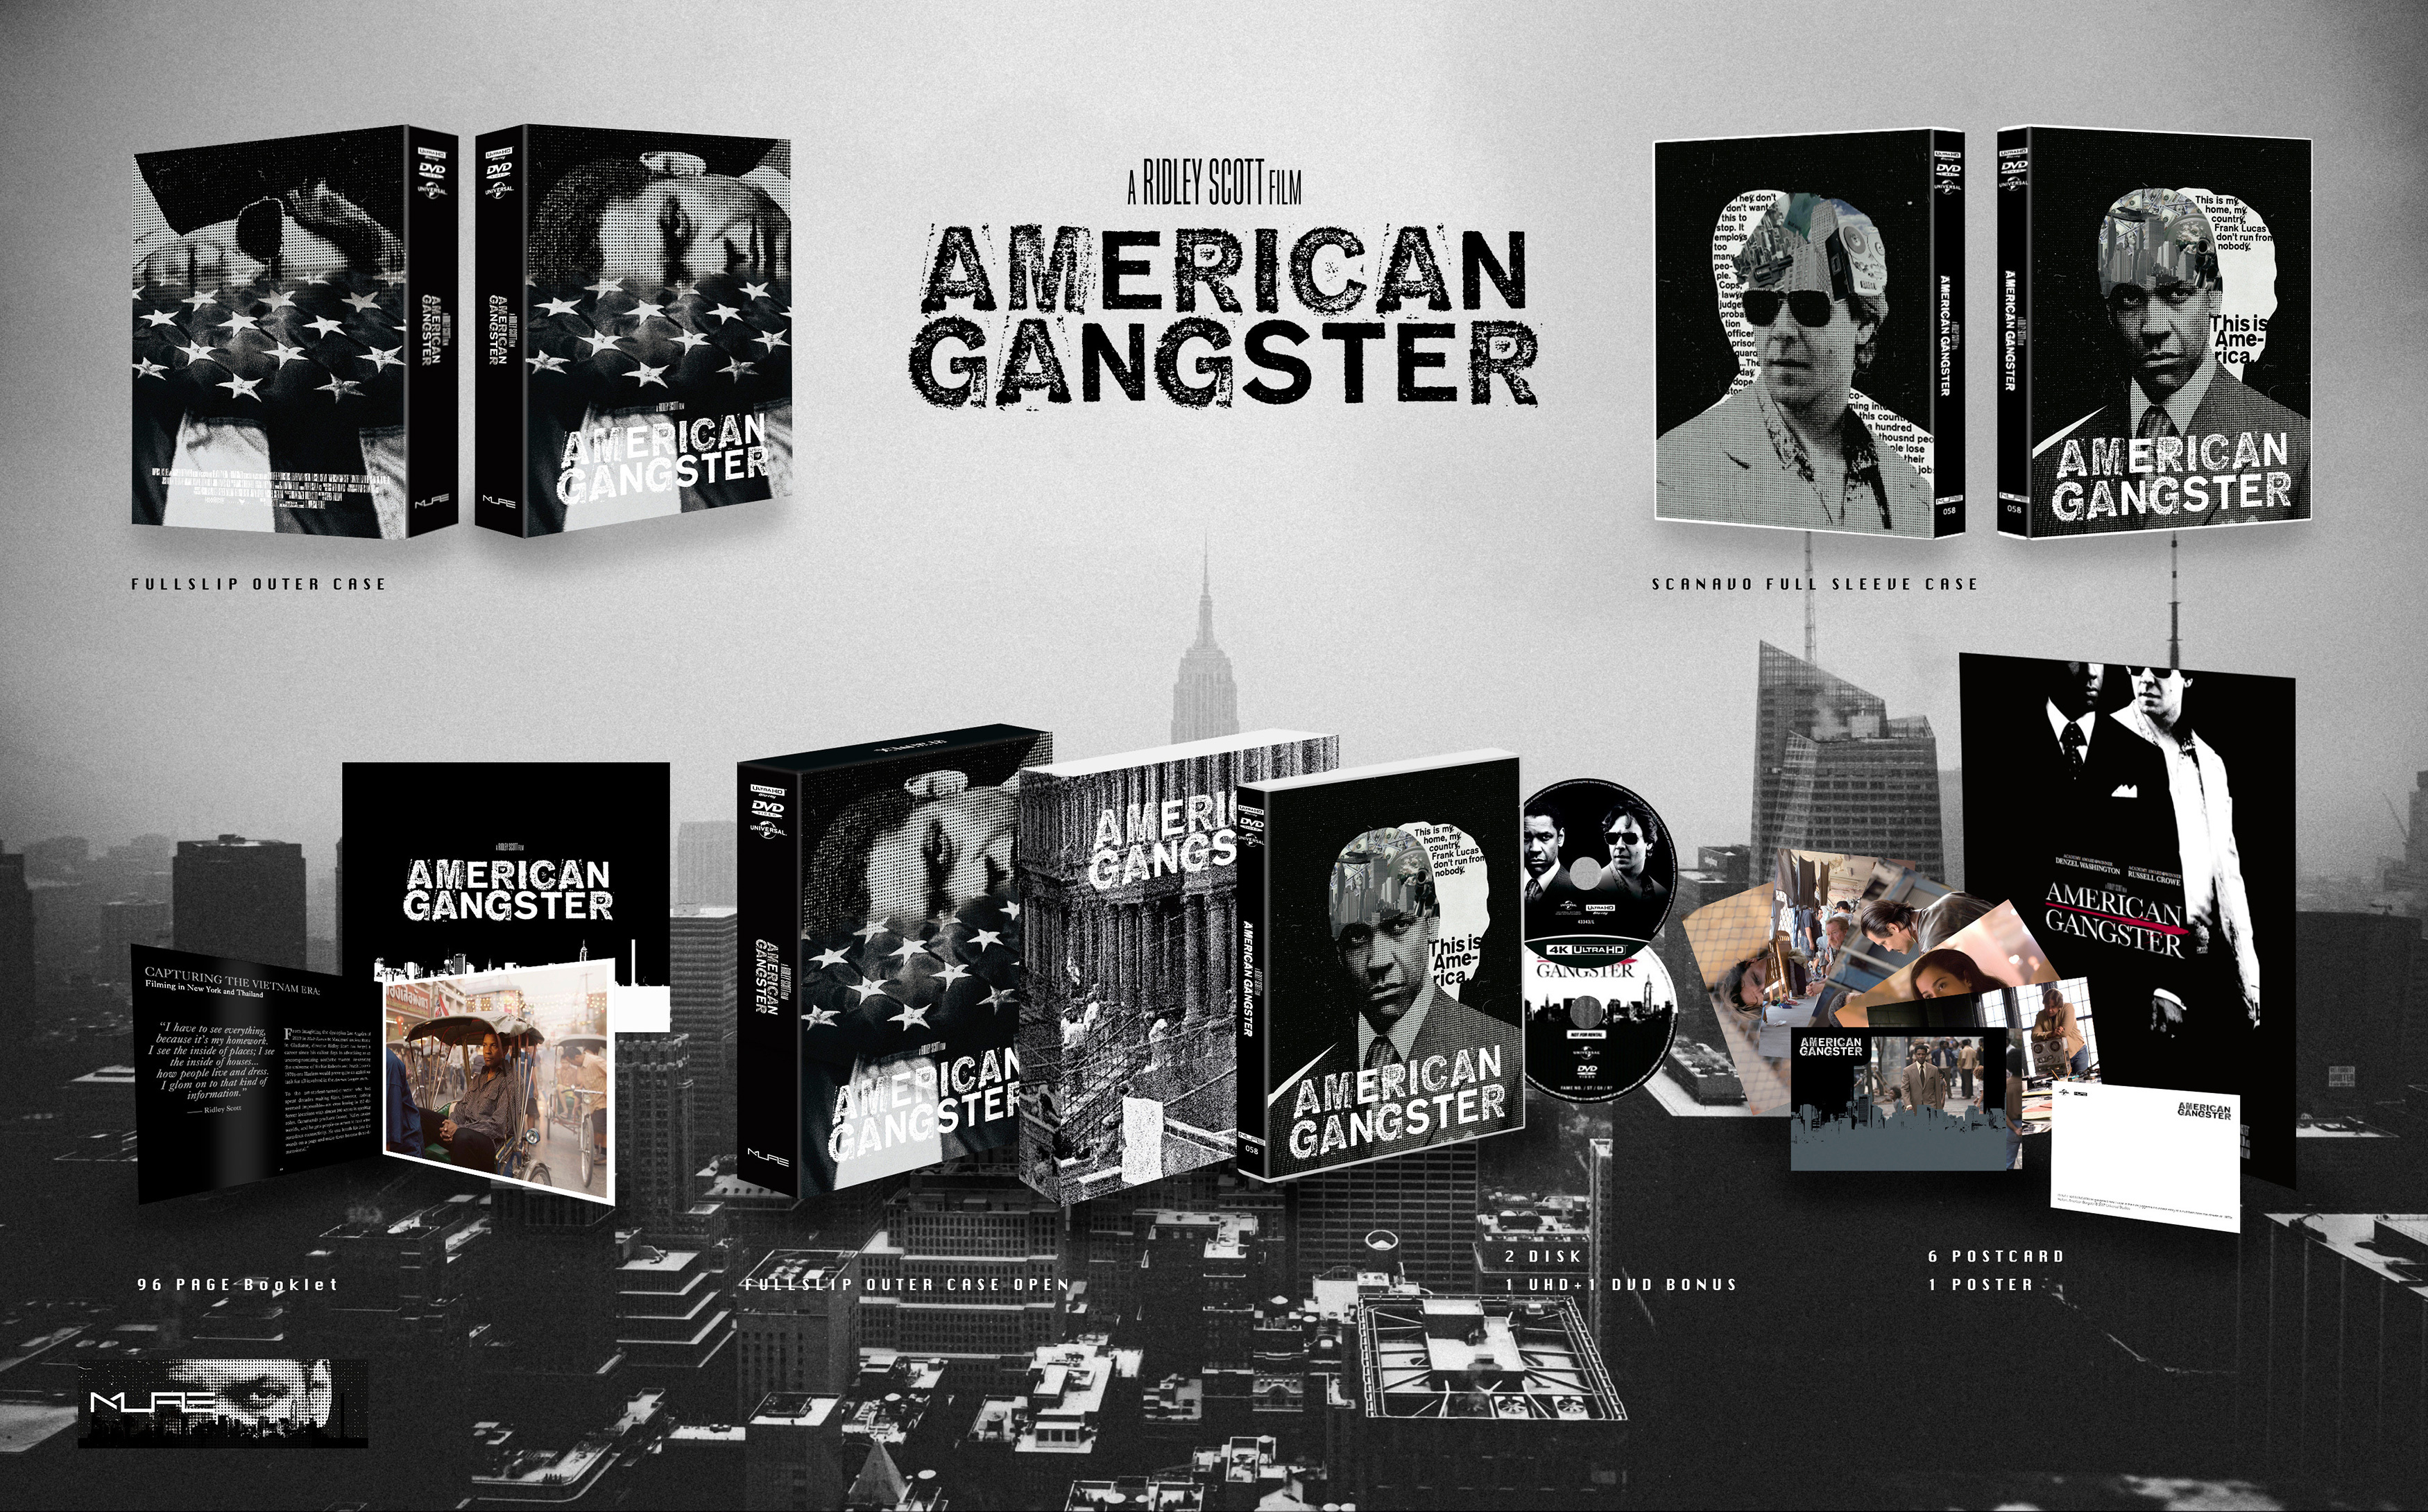 History In Motion: Ridley Scott's American Gangster